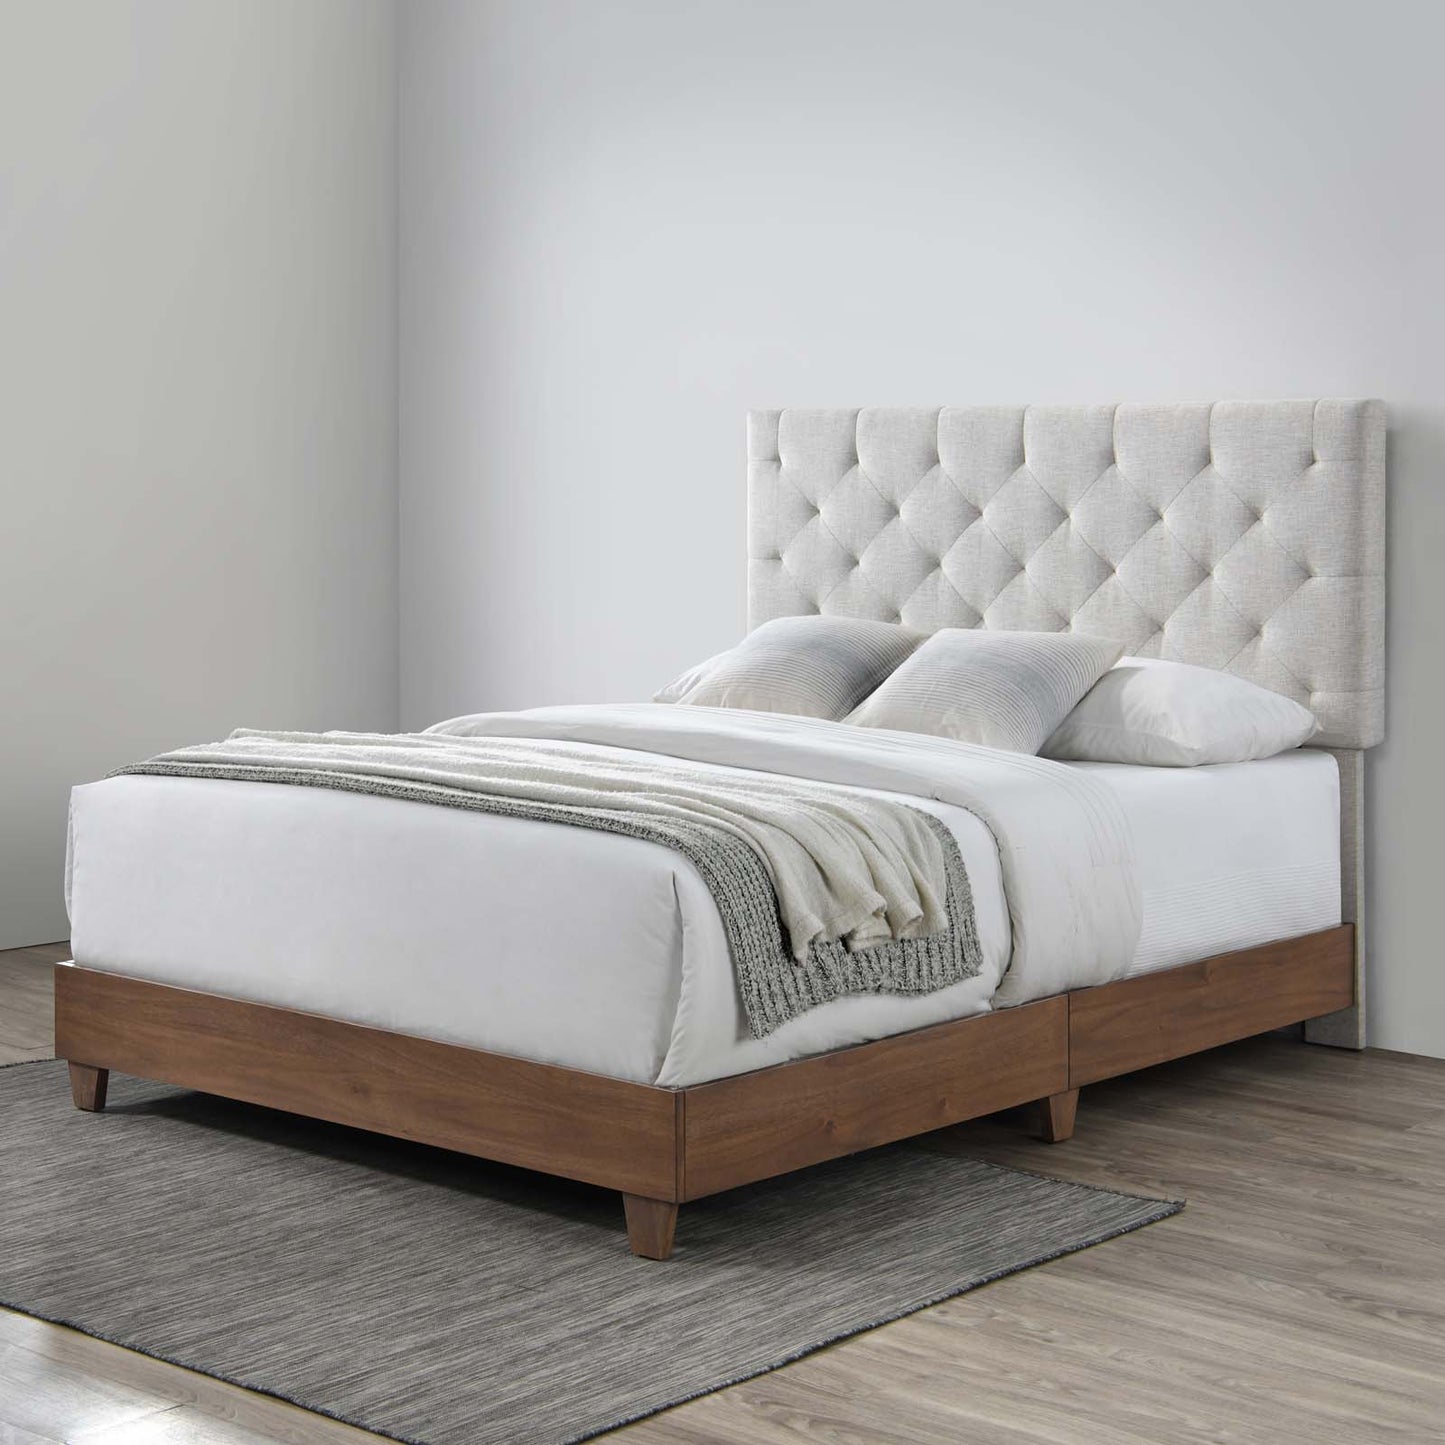 Rhiannon Diamond Tufted Upholstered Fabric Queen Bed Walnut Beige MOD-6146-WAL-BEI